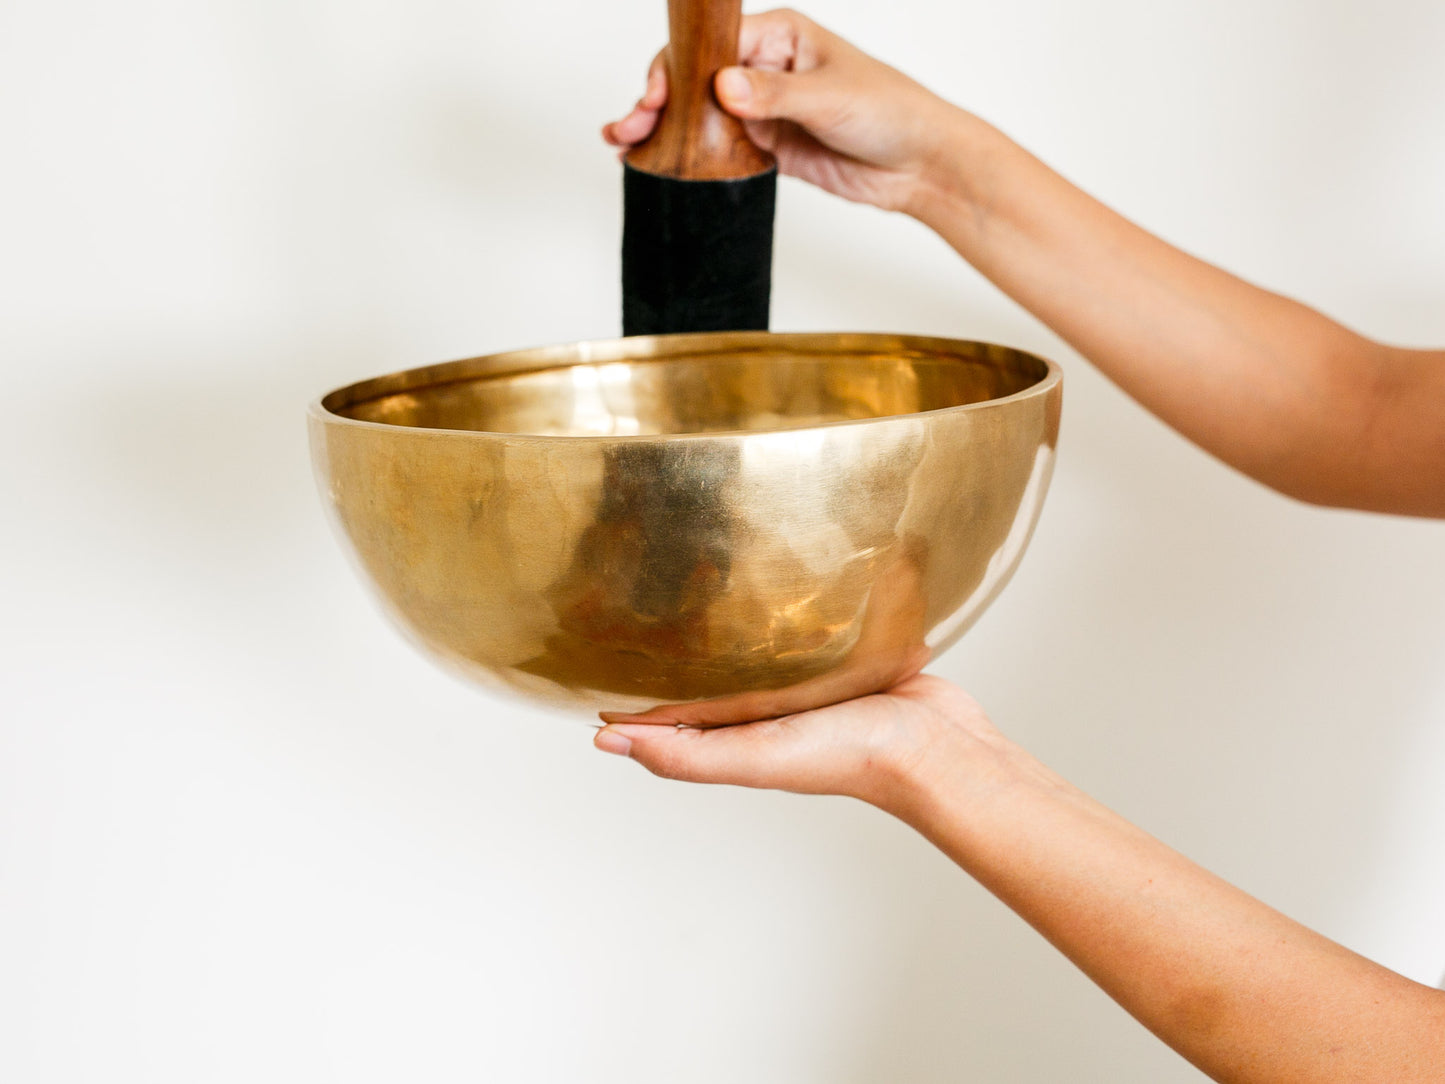 Contemporary Flow Singing Bowl - Base Note B2 125 Hz